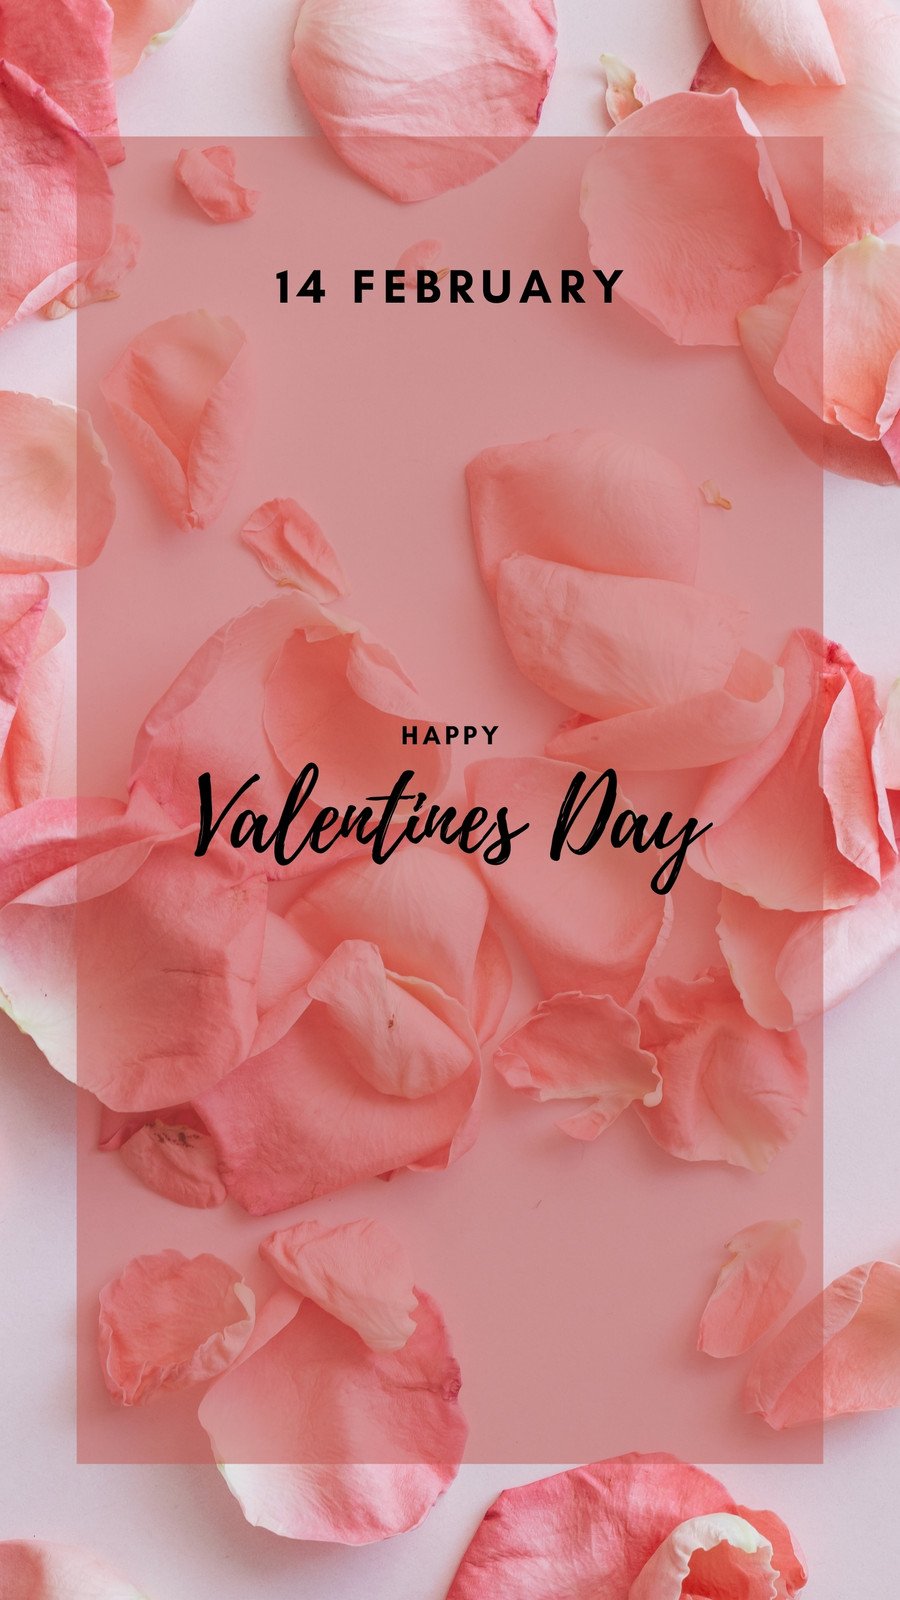 Vintage Valentines Inspired Aesthetic | iPhone Case